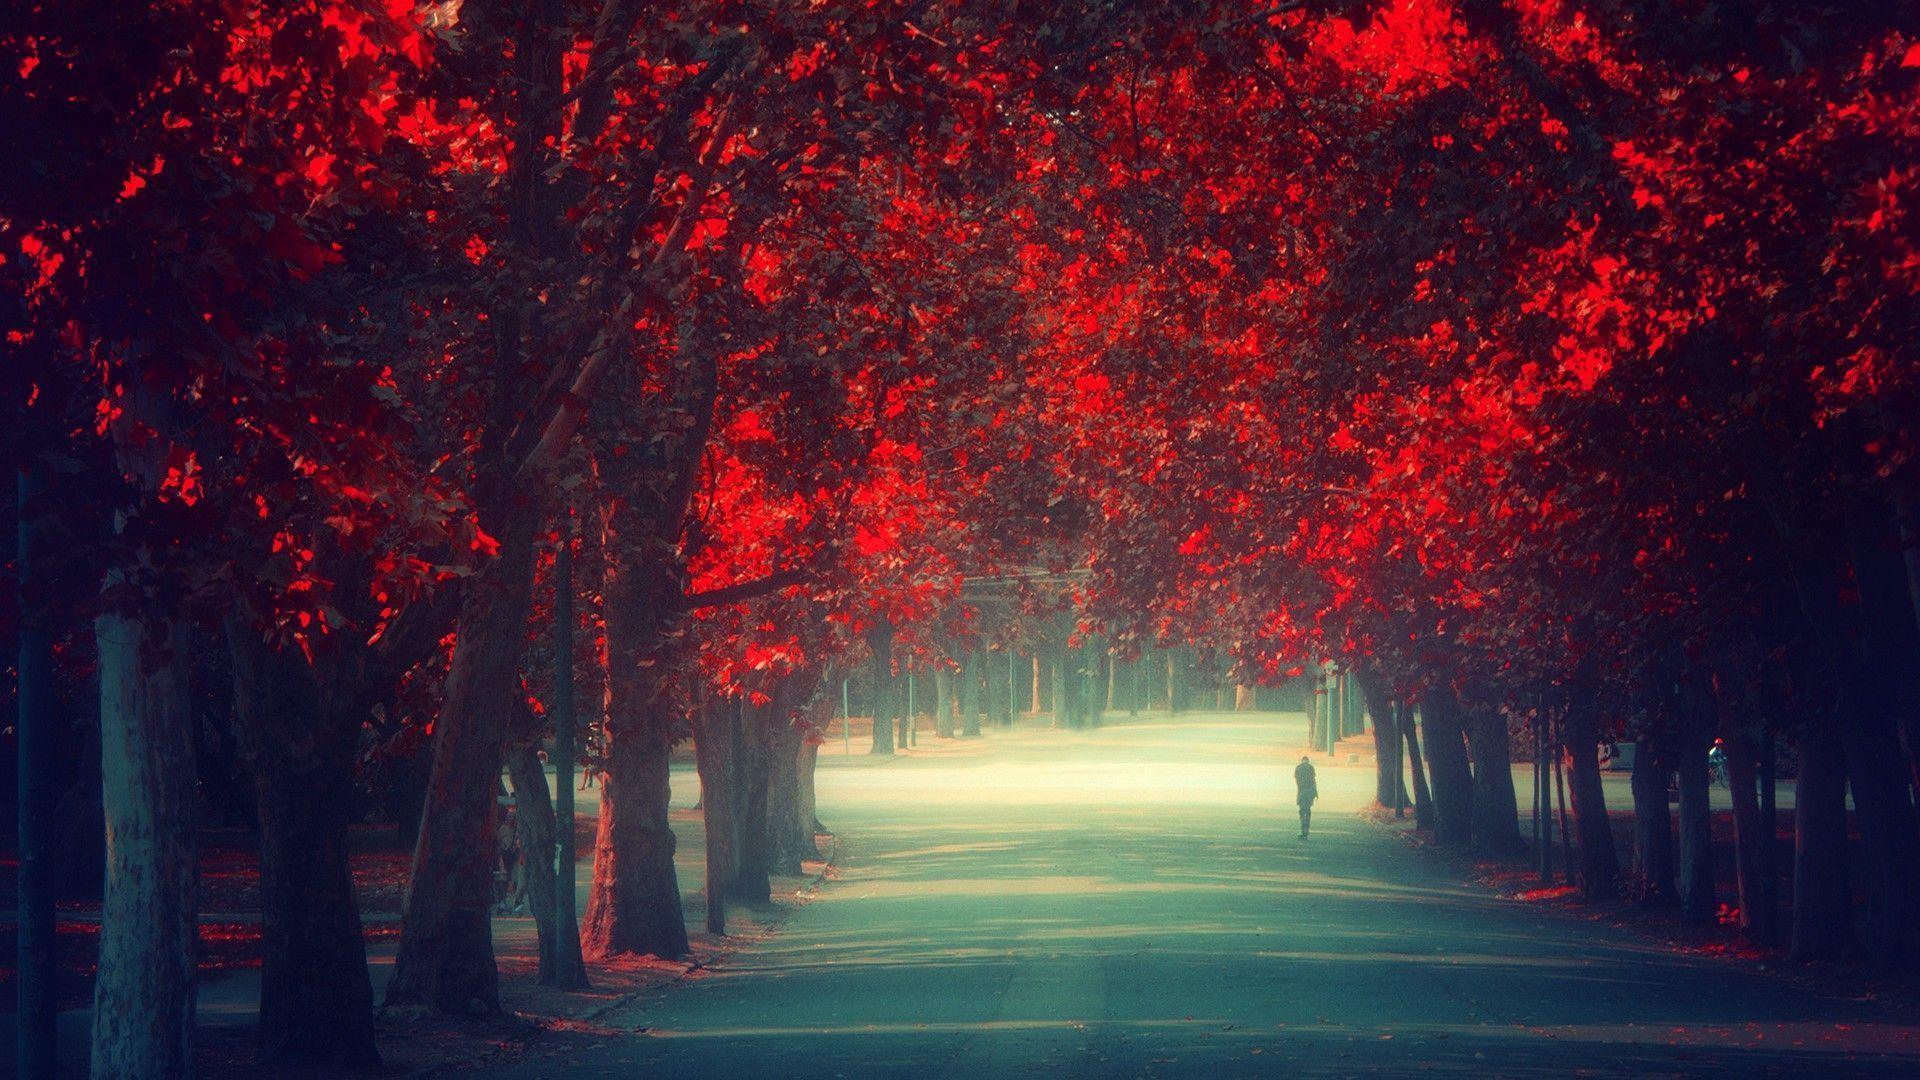 Trees Autumn Season Red Leaves Remembrance Wallpaper 1920×1080